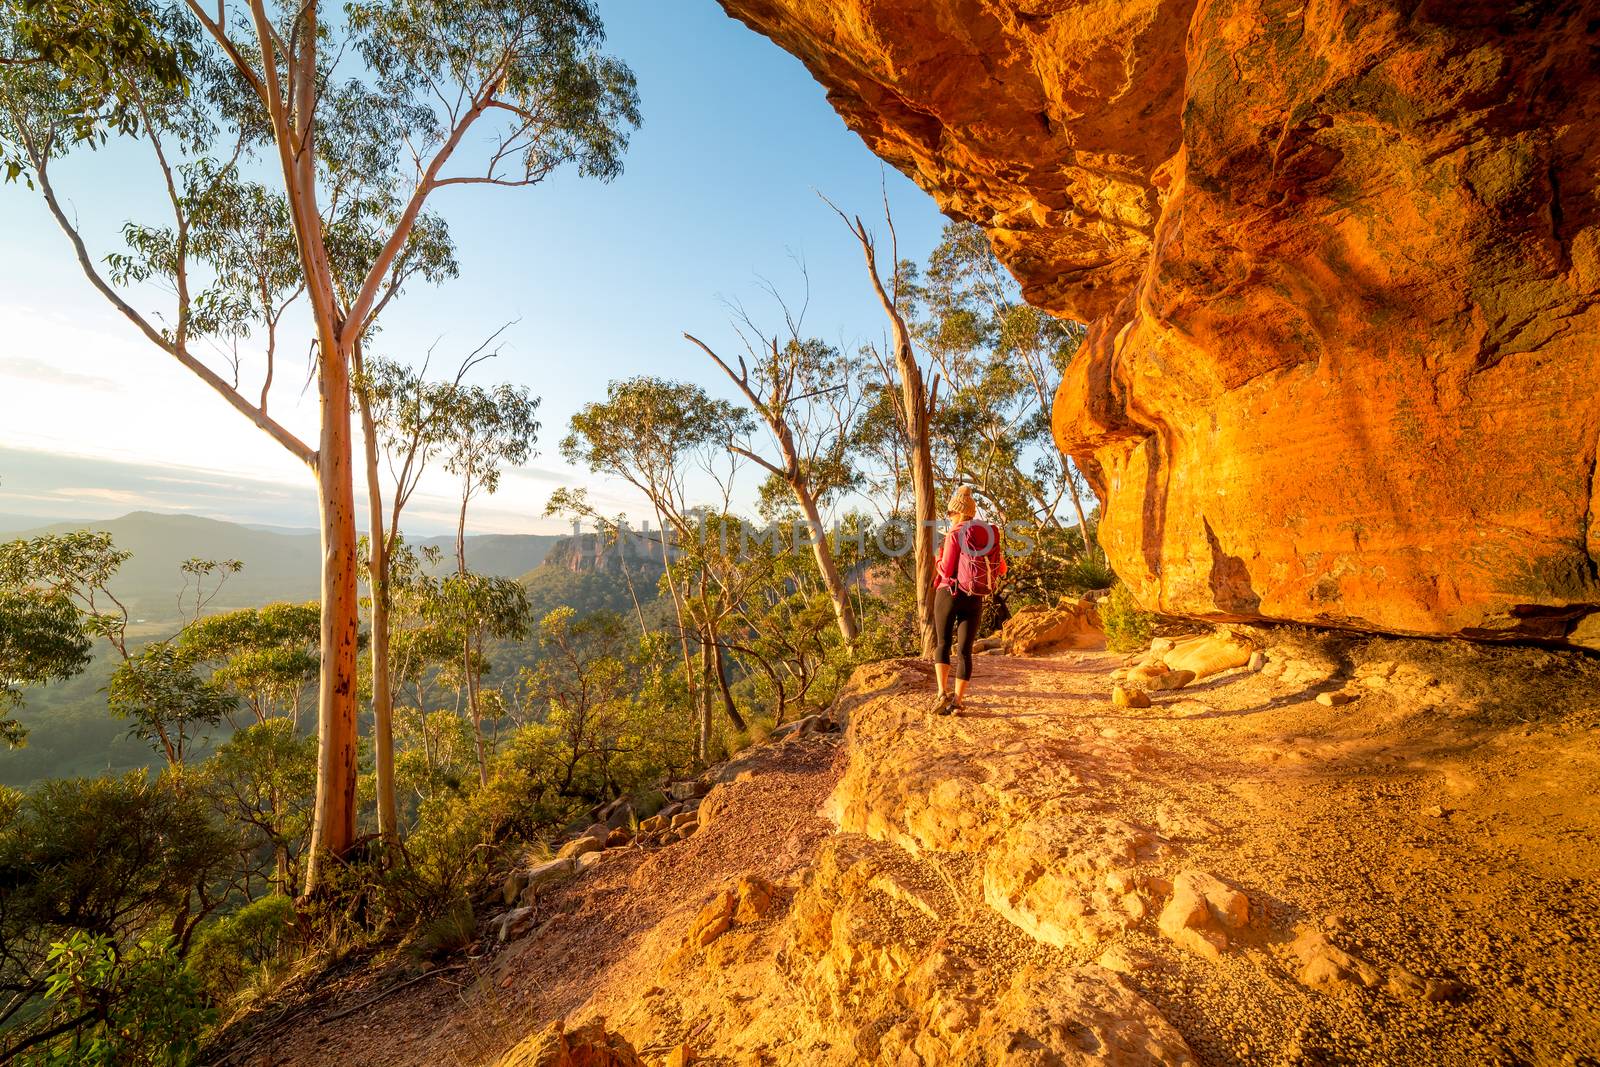 Afternoon sunlight on the sandstone cliffs and a hiker treks through the upper Blue Mountains admiring the views